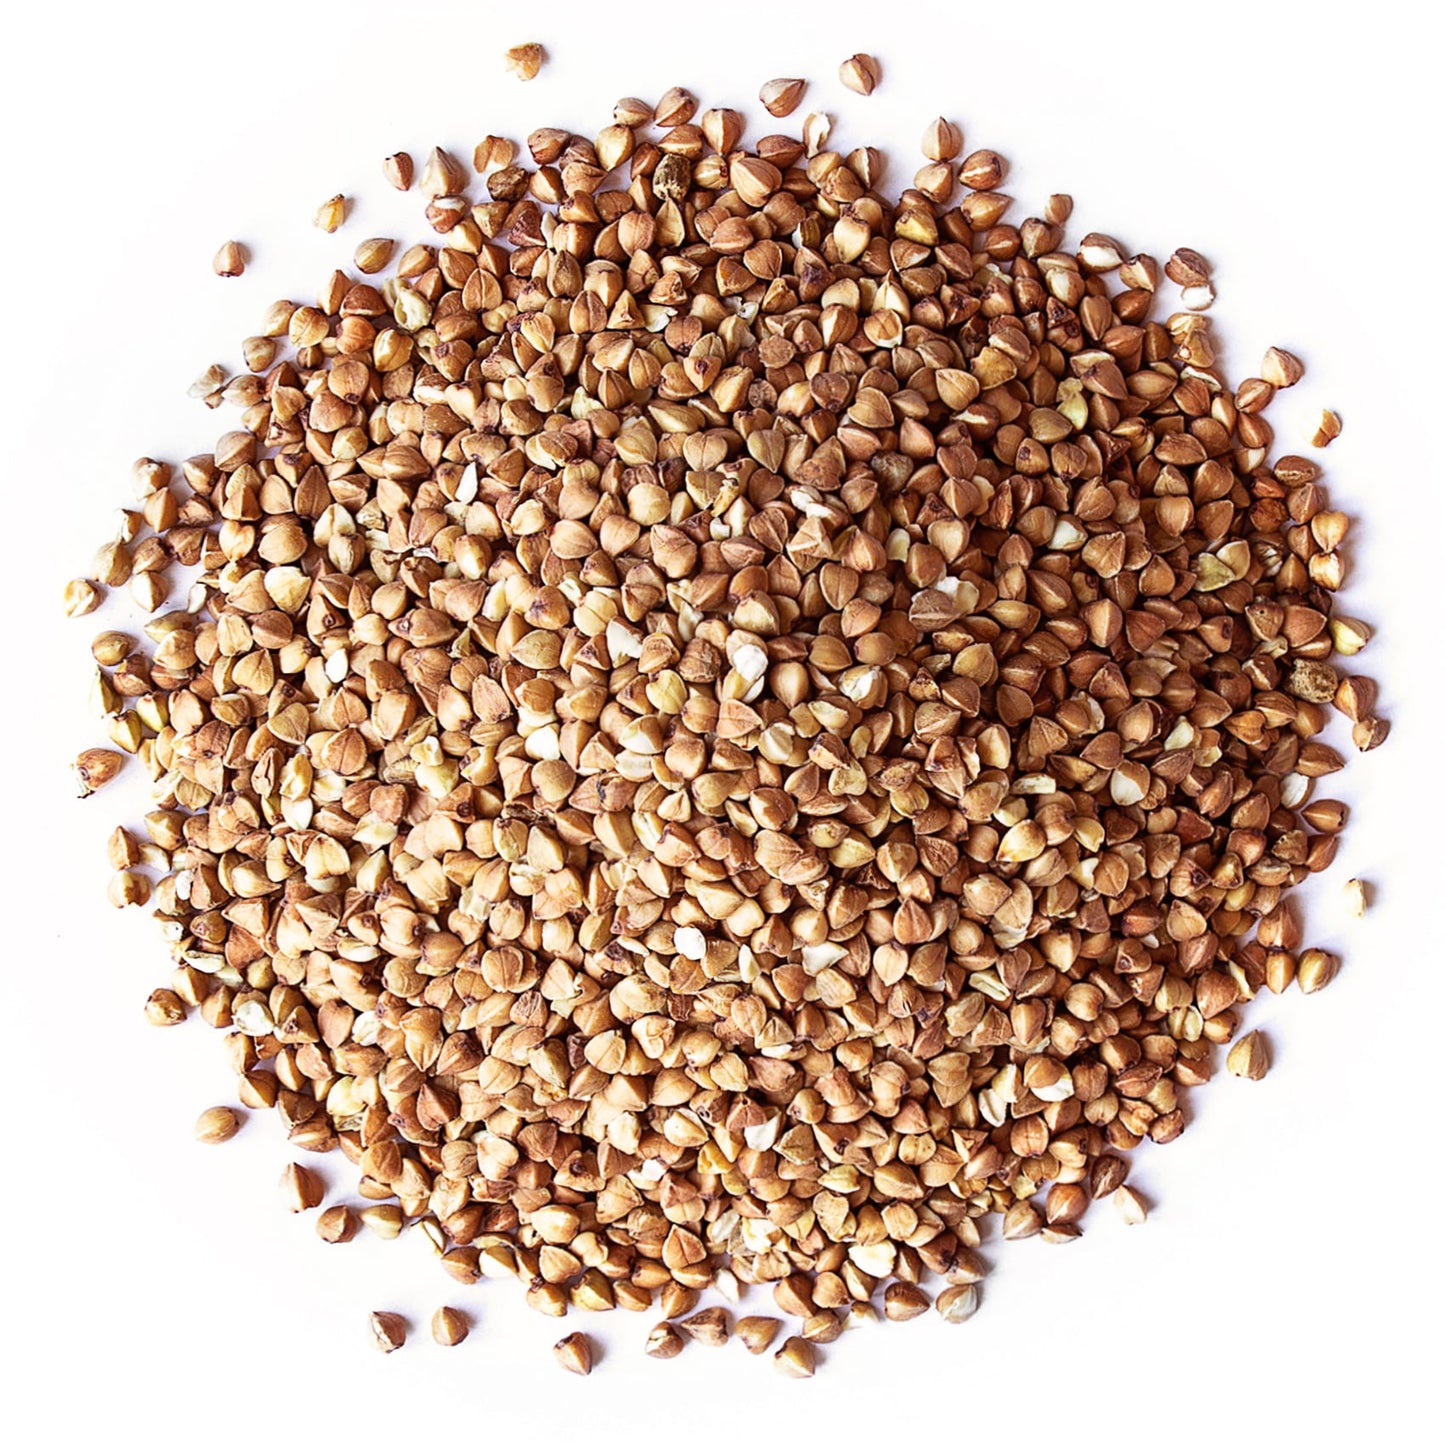 Buckwheat Kasha — Non-GMO Verified, Grechka, Toasted Whole Groats, Made from Hulled Seeds, Kosher, Bulk. Rich in Dietary Fiber, Sirtfood - by Food to Live